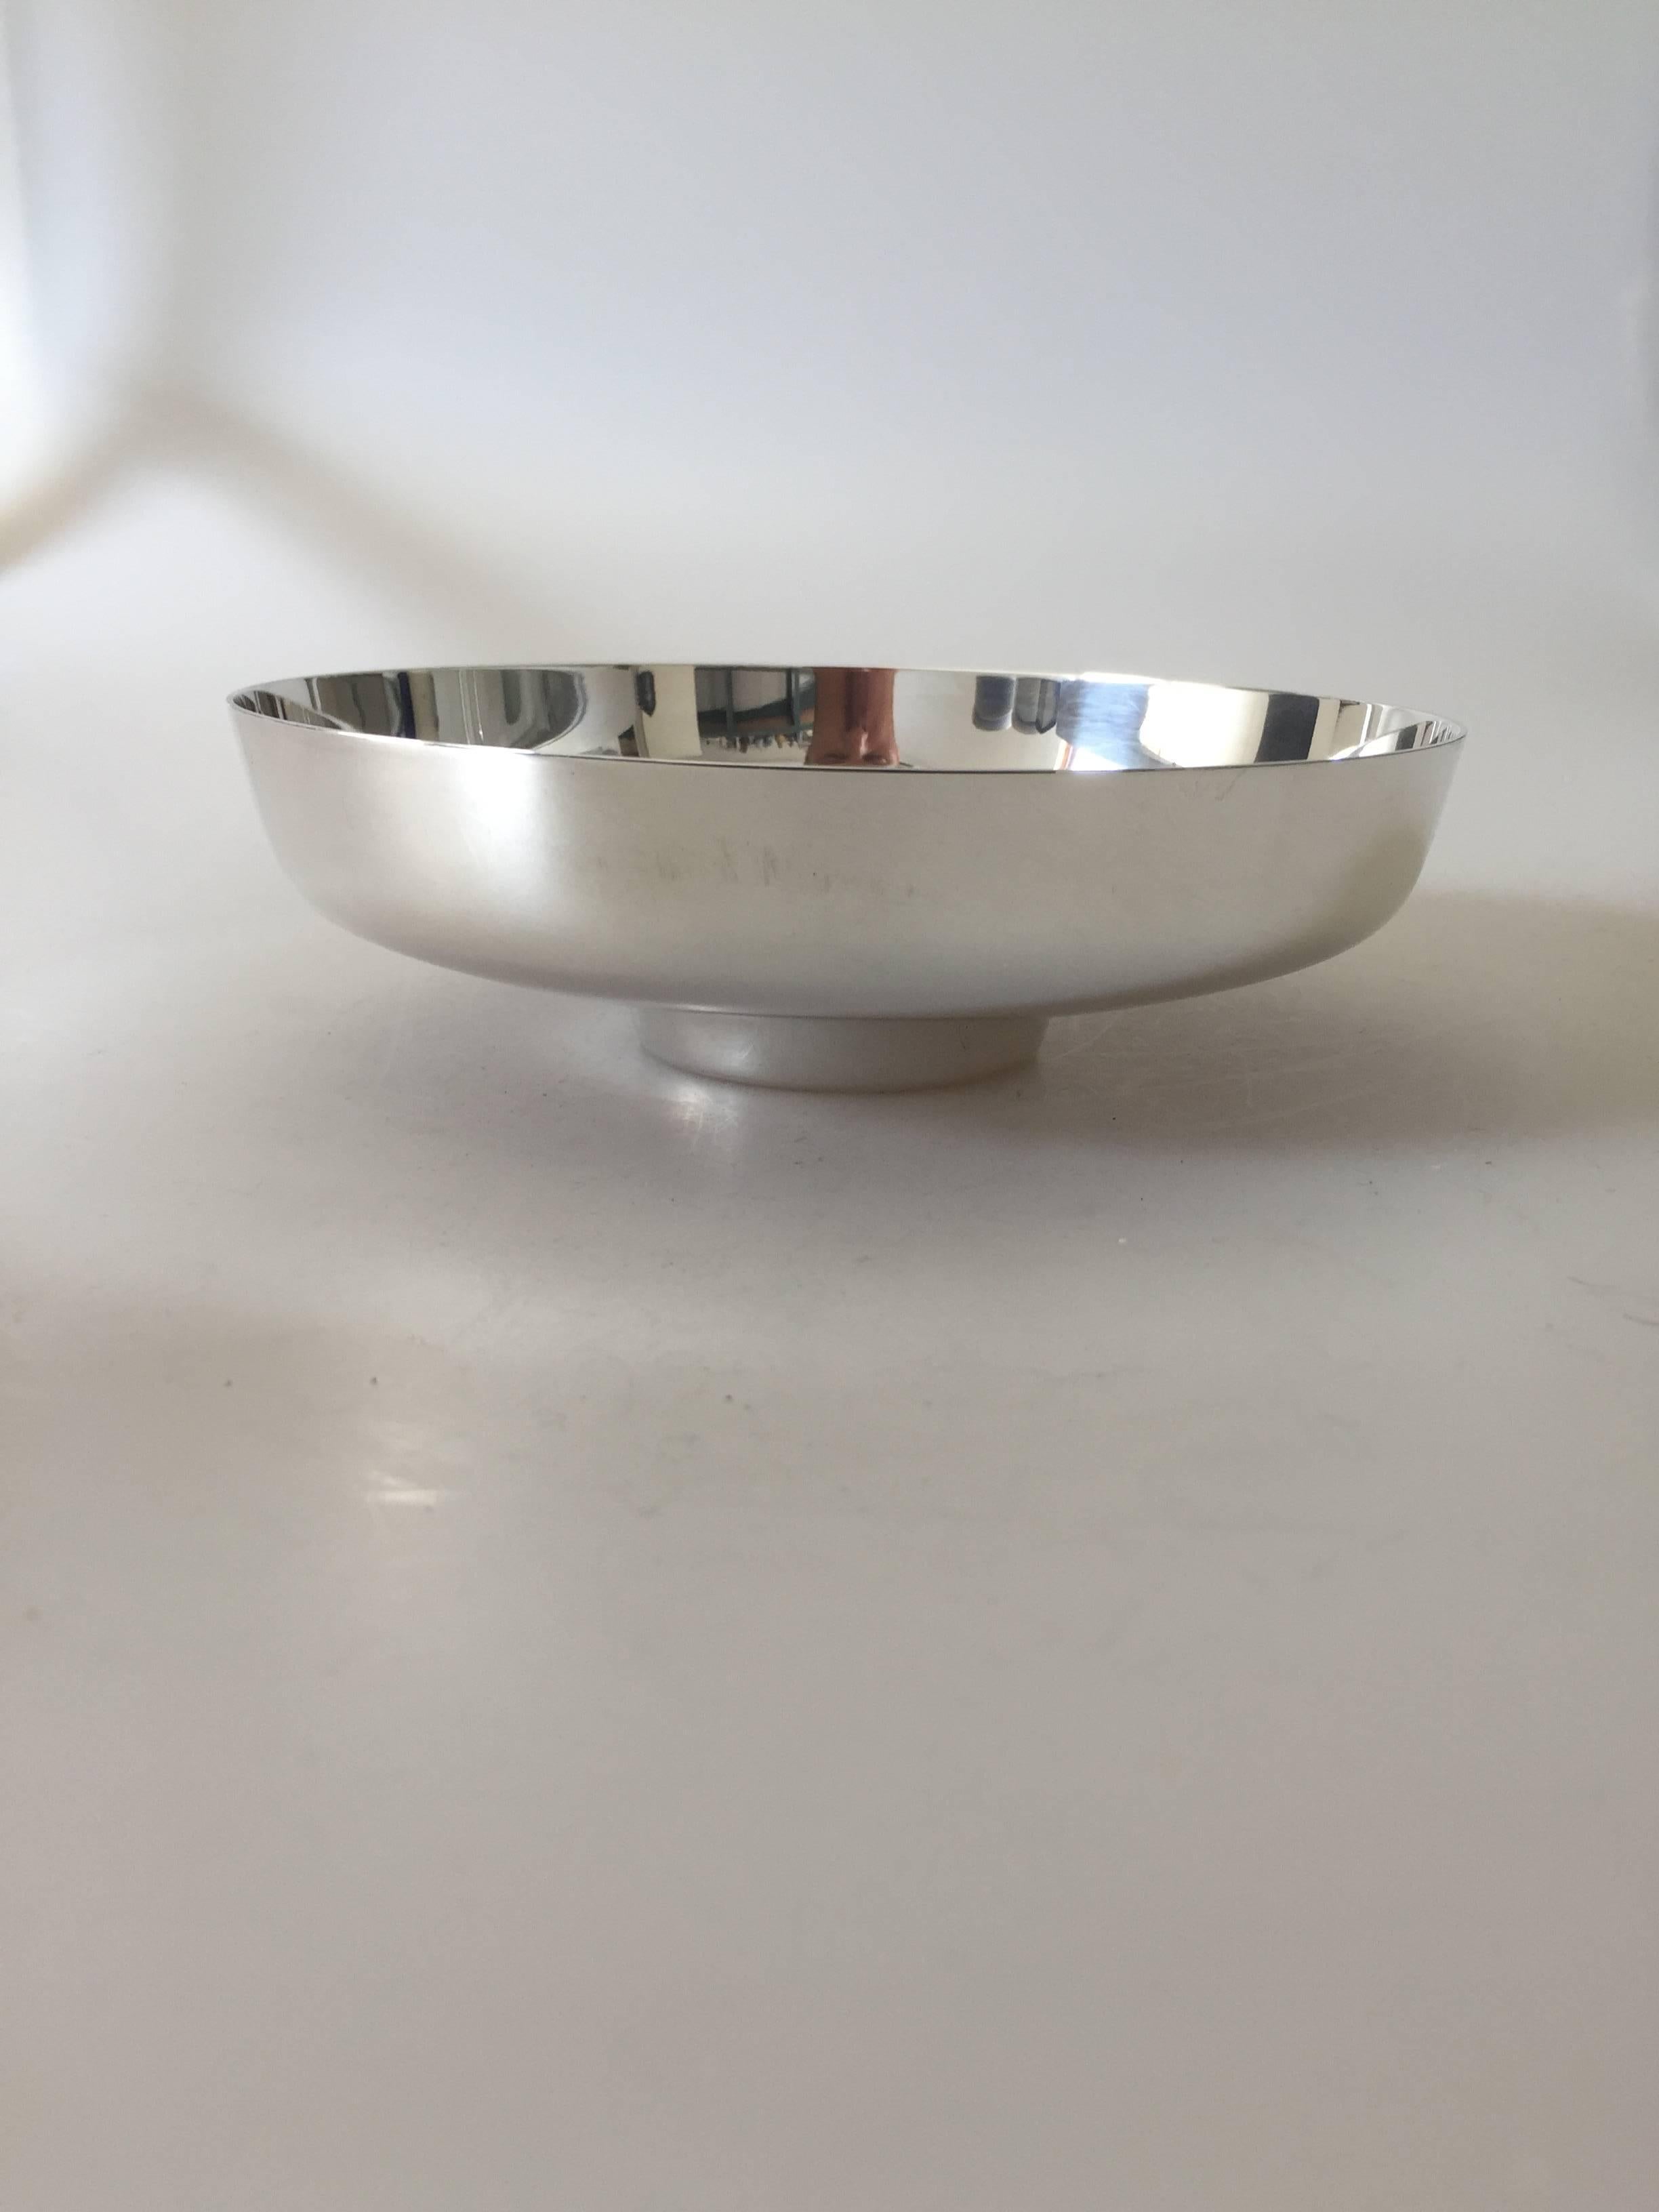 Georg Jensen sterling silver bowl #1132B designed by Henning Koppel. Measures 16.6 cm and is in a good condition. We have two in stock.

Henning Koppels (1918-1981) modern designs broke new ground for Georg Jensen. His designs were constructed in